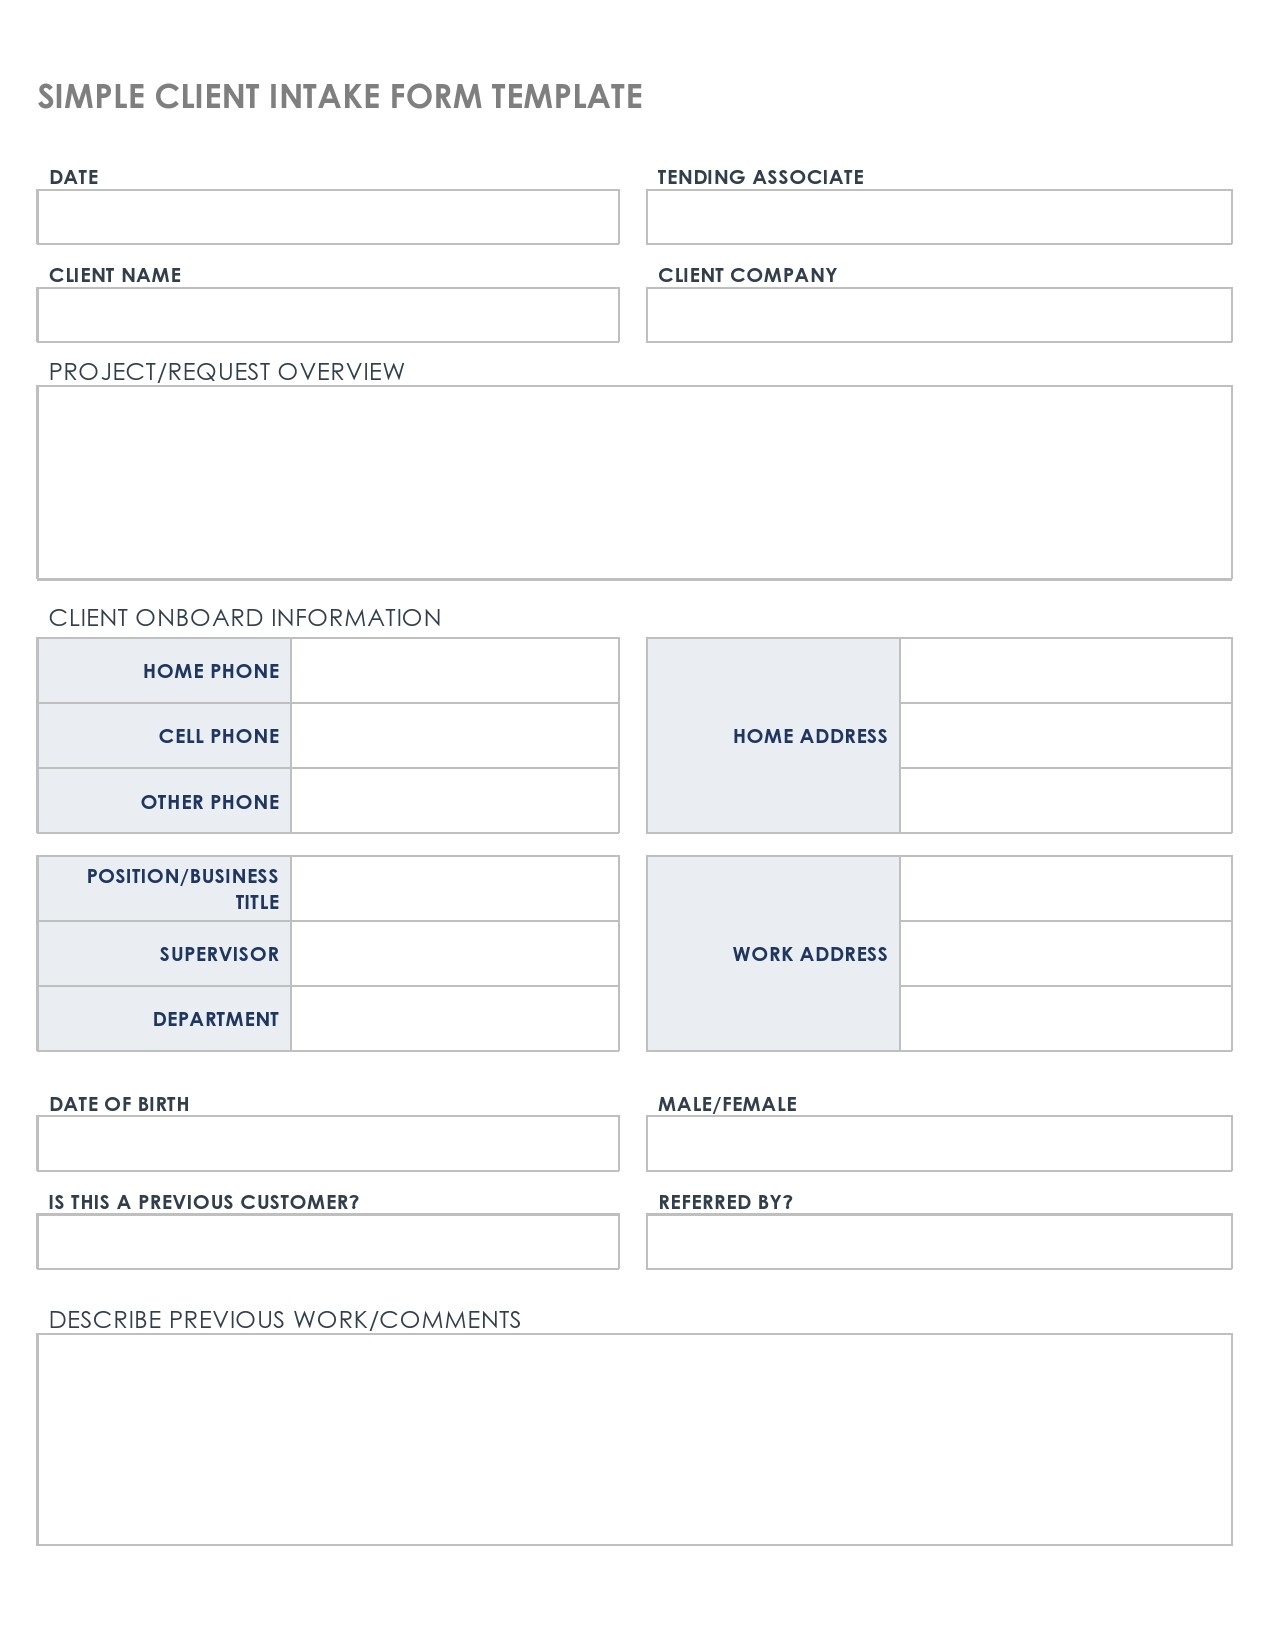 42 Printable Client Intake Forms FREE Templates TemplateLab